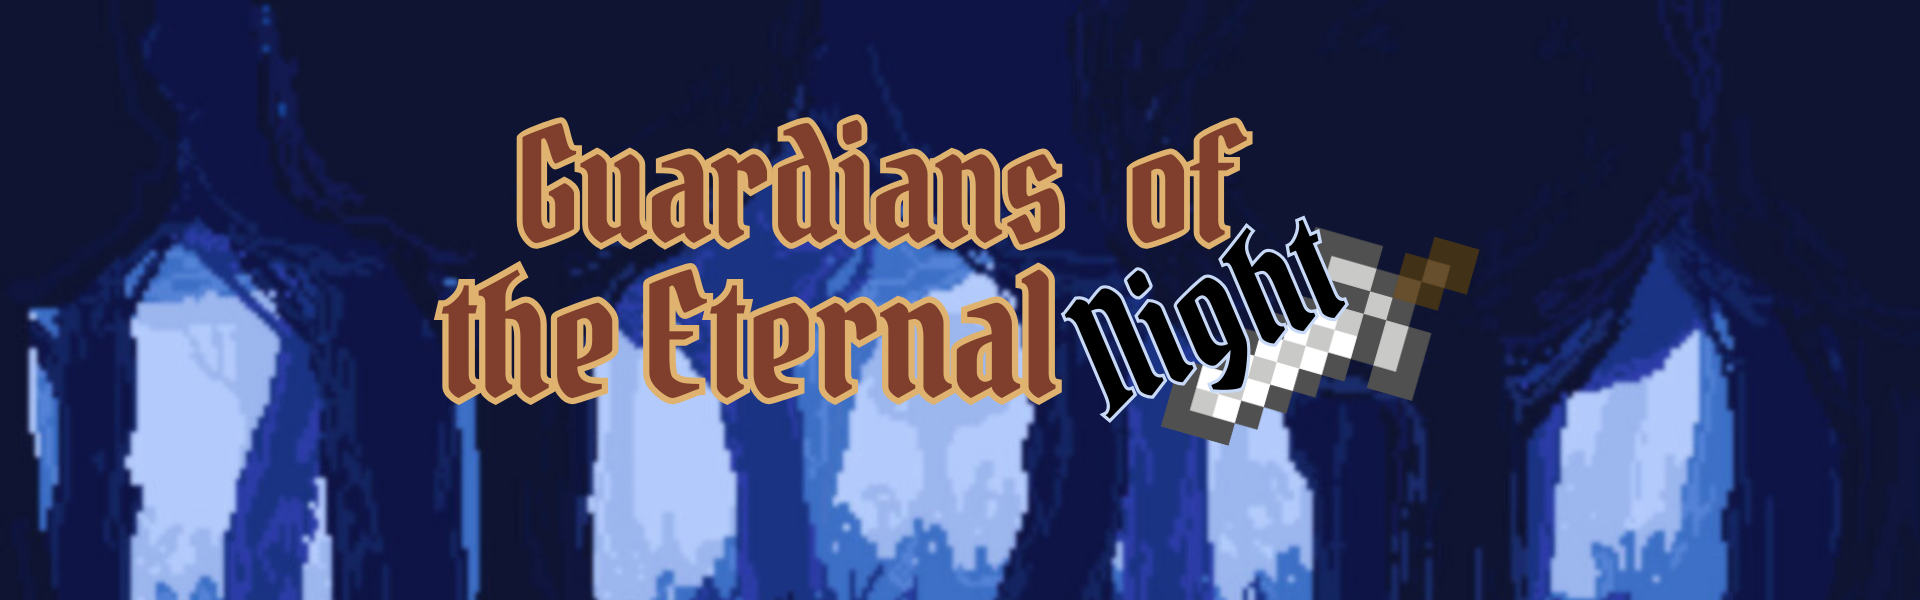 Guardians of the Eternal Night